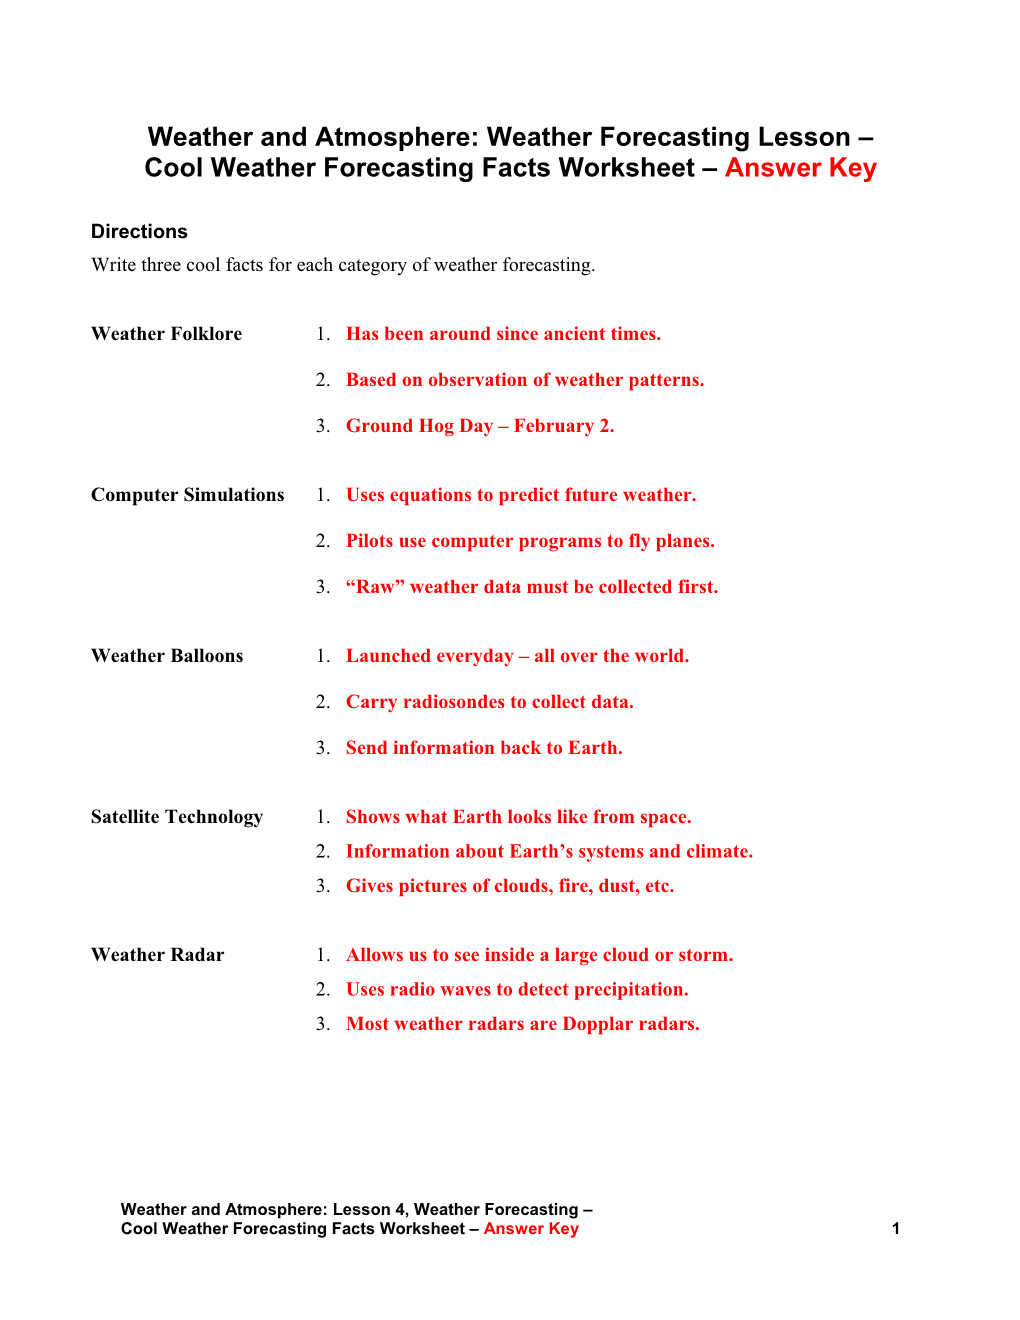 Weather and Atmosphere: Weather Forecasting Lesson Cool Weather Forecasting Facts Worksheet